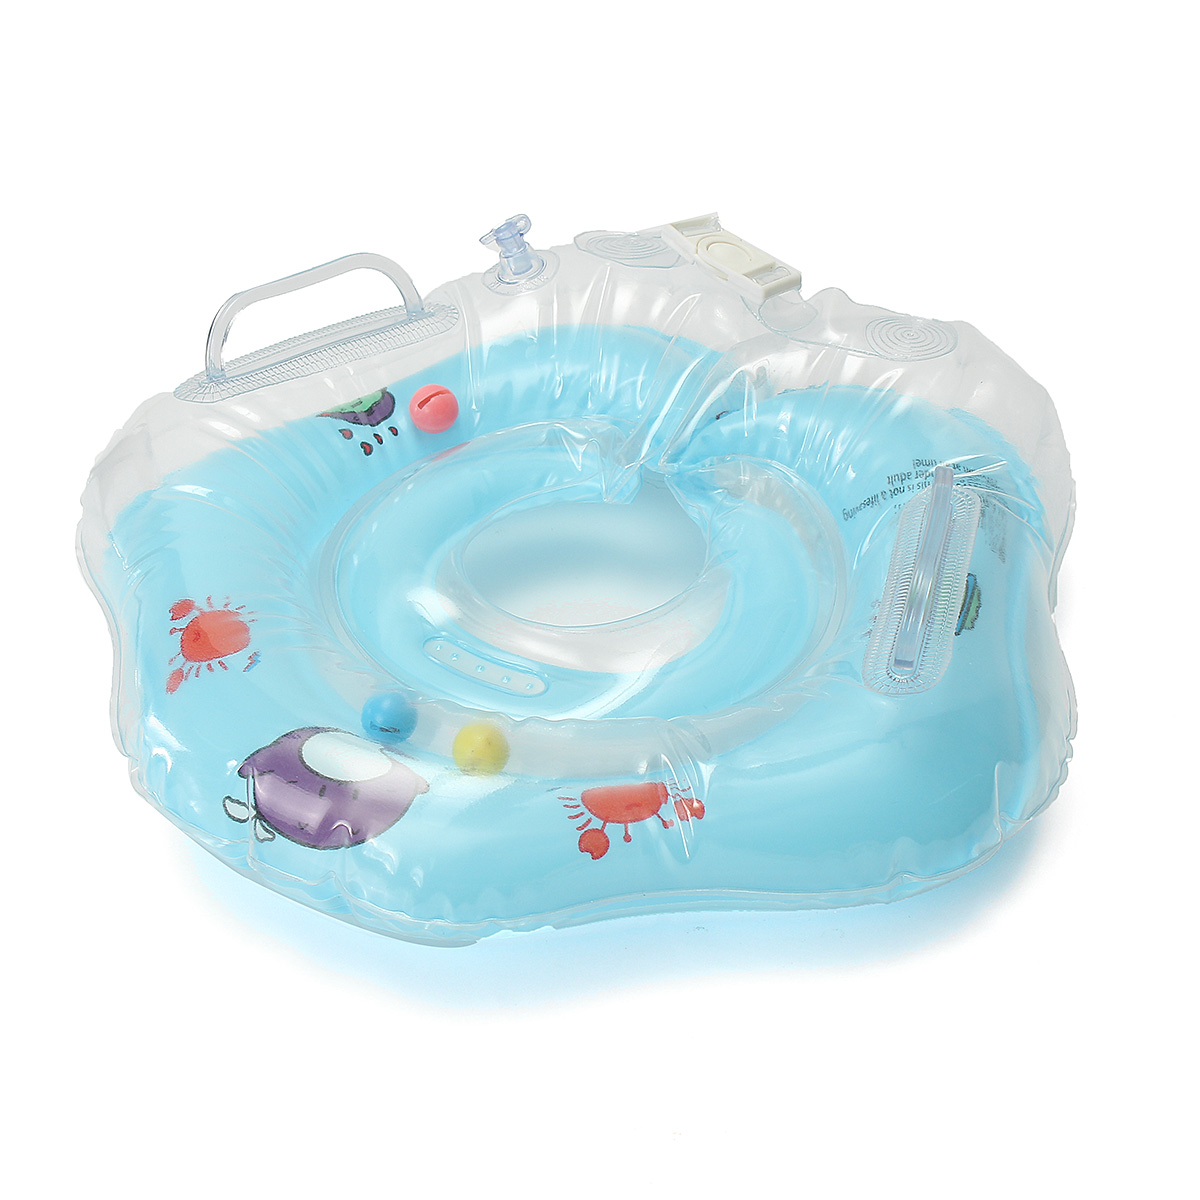 Baby-Infant-Swimming-Pool-Bath-Neck-Floating-Inflatable-Ring-Built-in-Belt-1169362-9